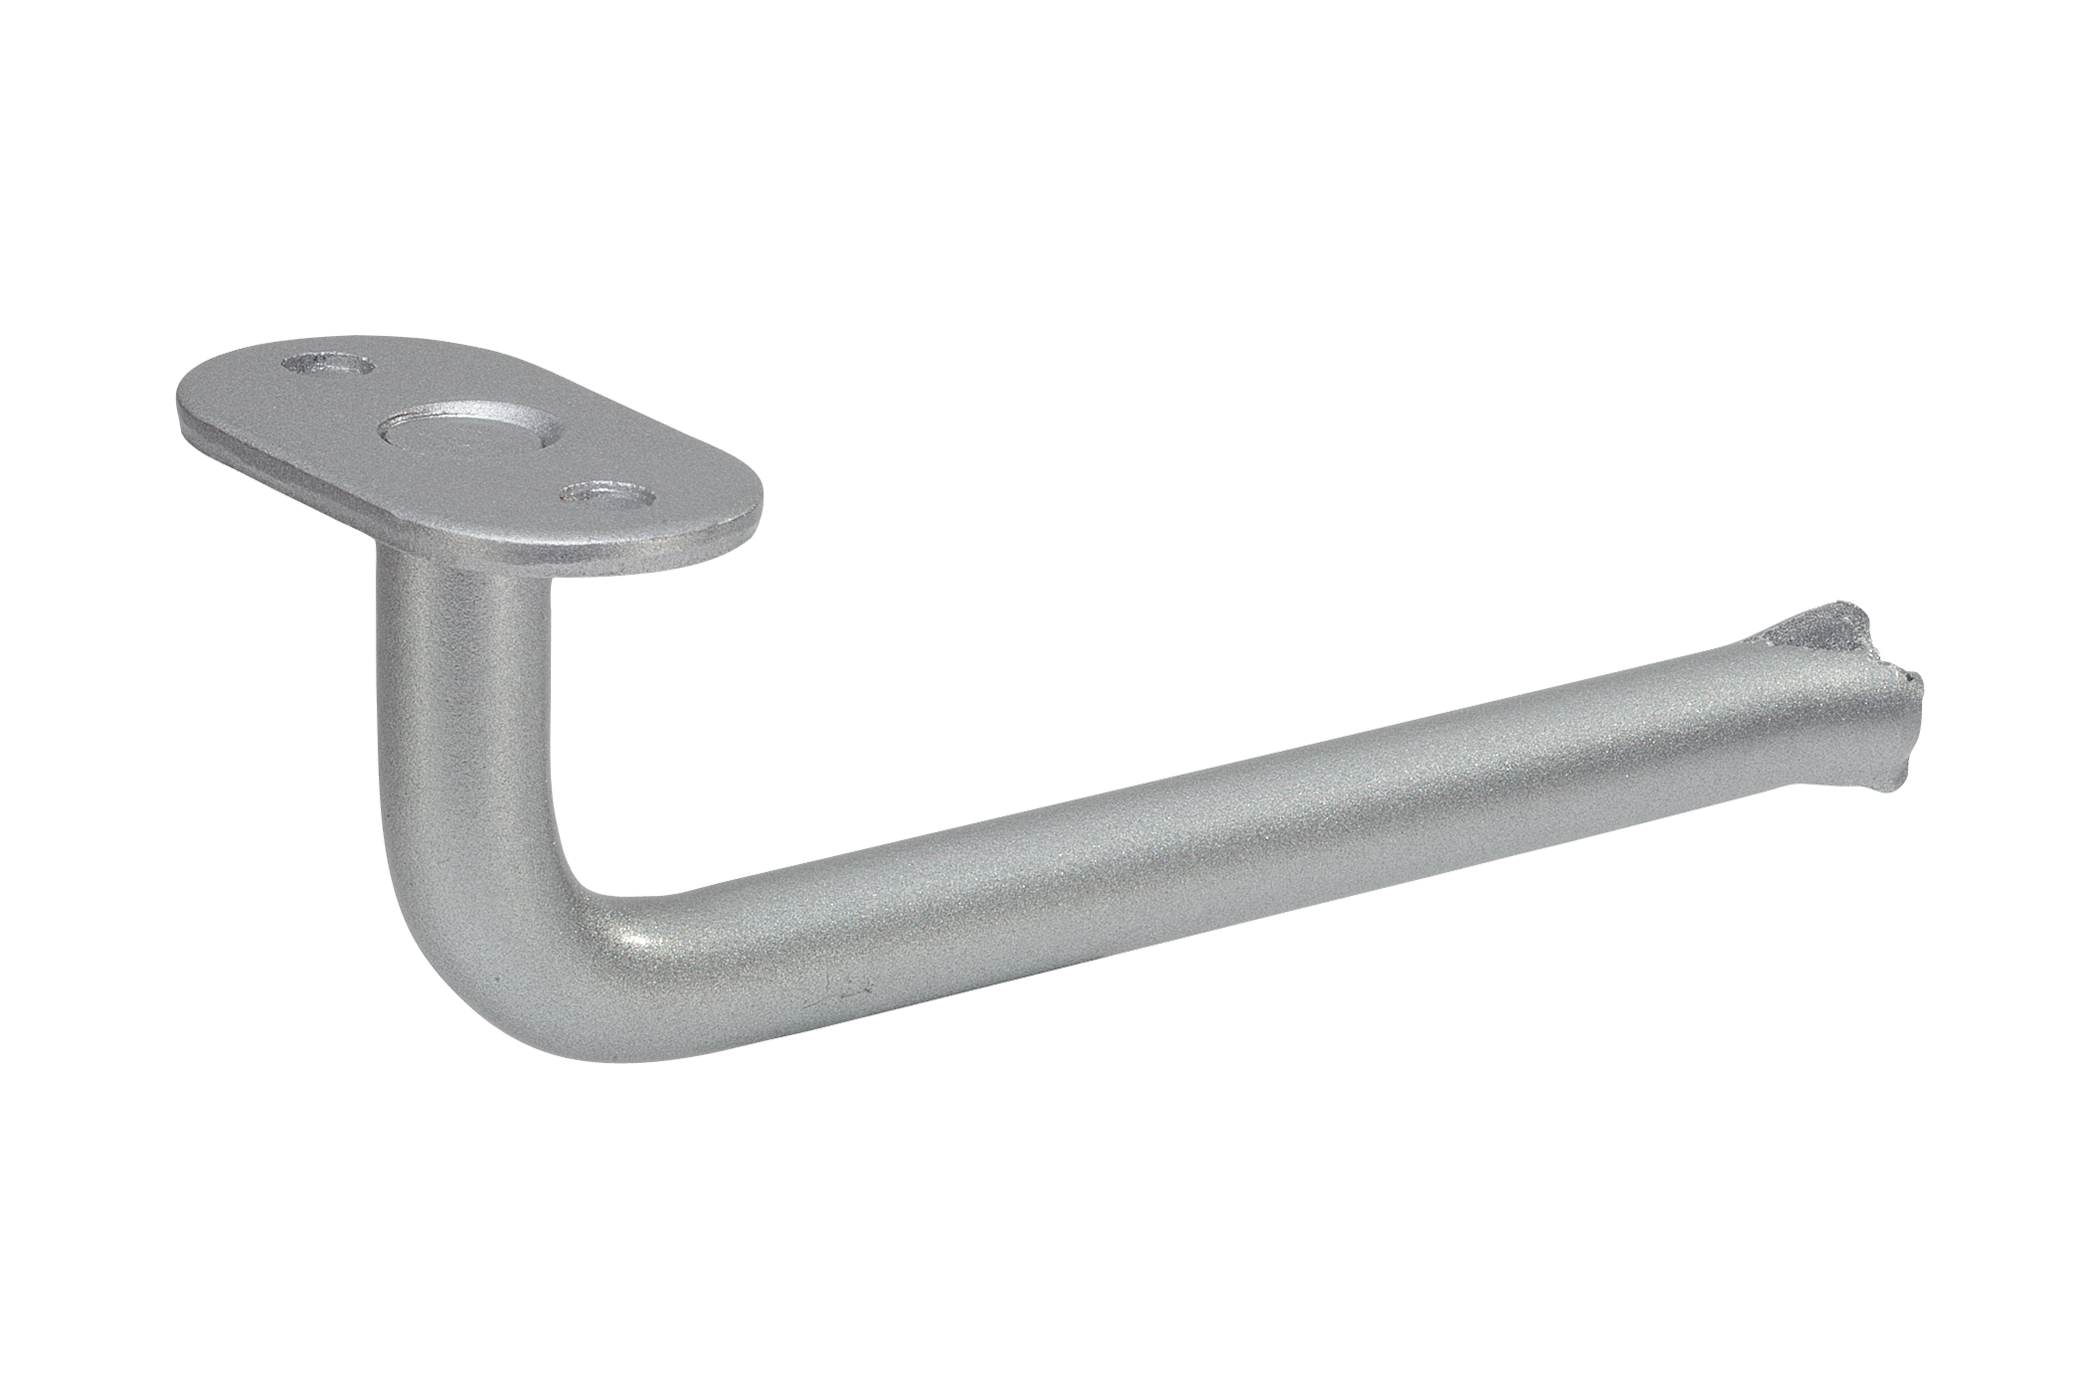 KWS Handrail support 4523 in finish 02 (steel, silver stove-enamelled)